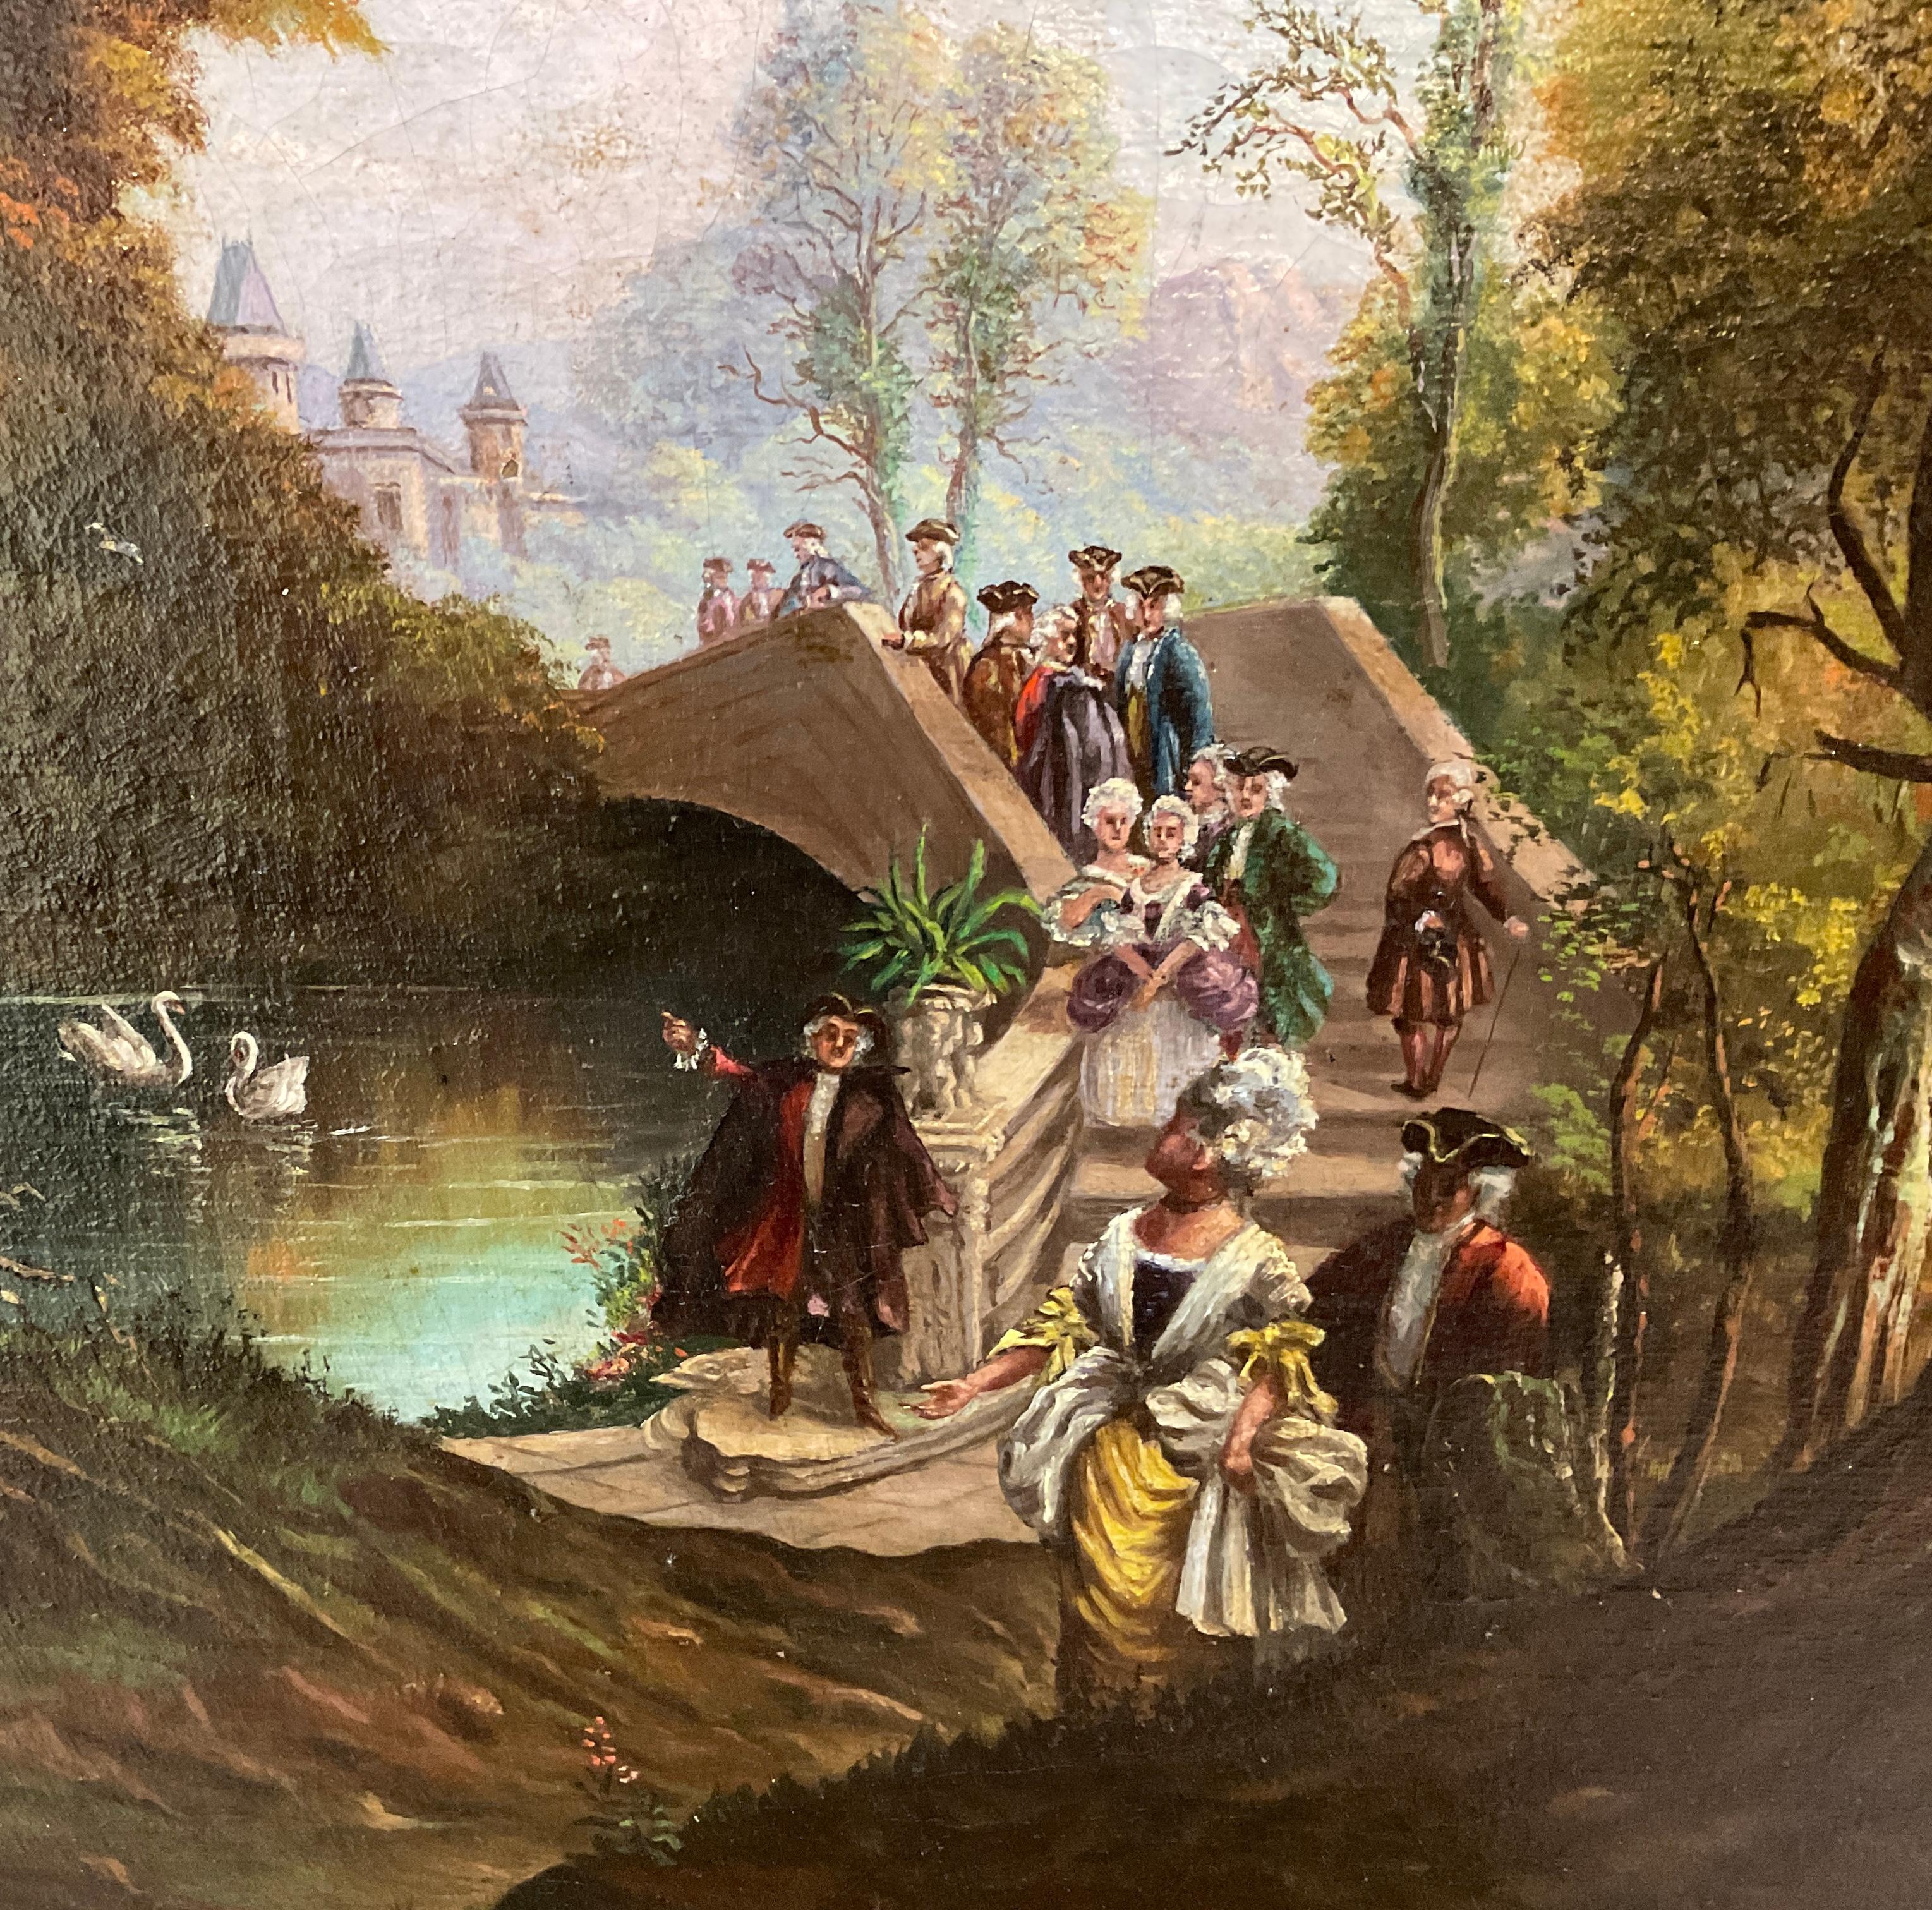 A Glimpse into French Romanticism: 19th-Century Oil Painting

This captivating oil on canvas painting captures the essence of the French Romantic movement in the late 19th century.  The scene depicts a charming genre scene, bustling with life and